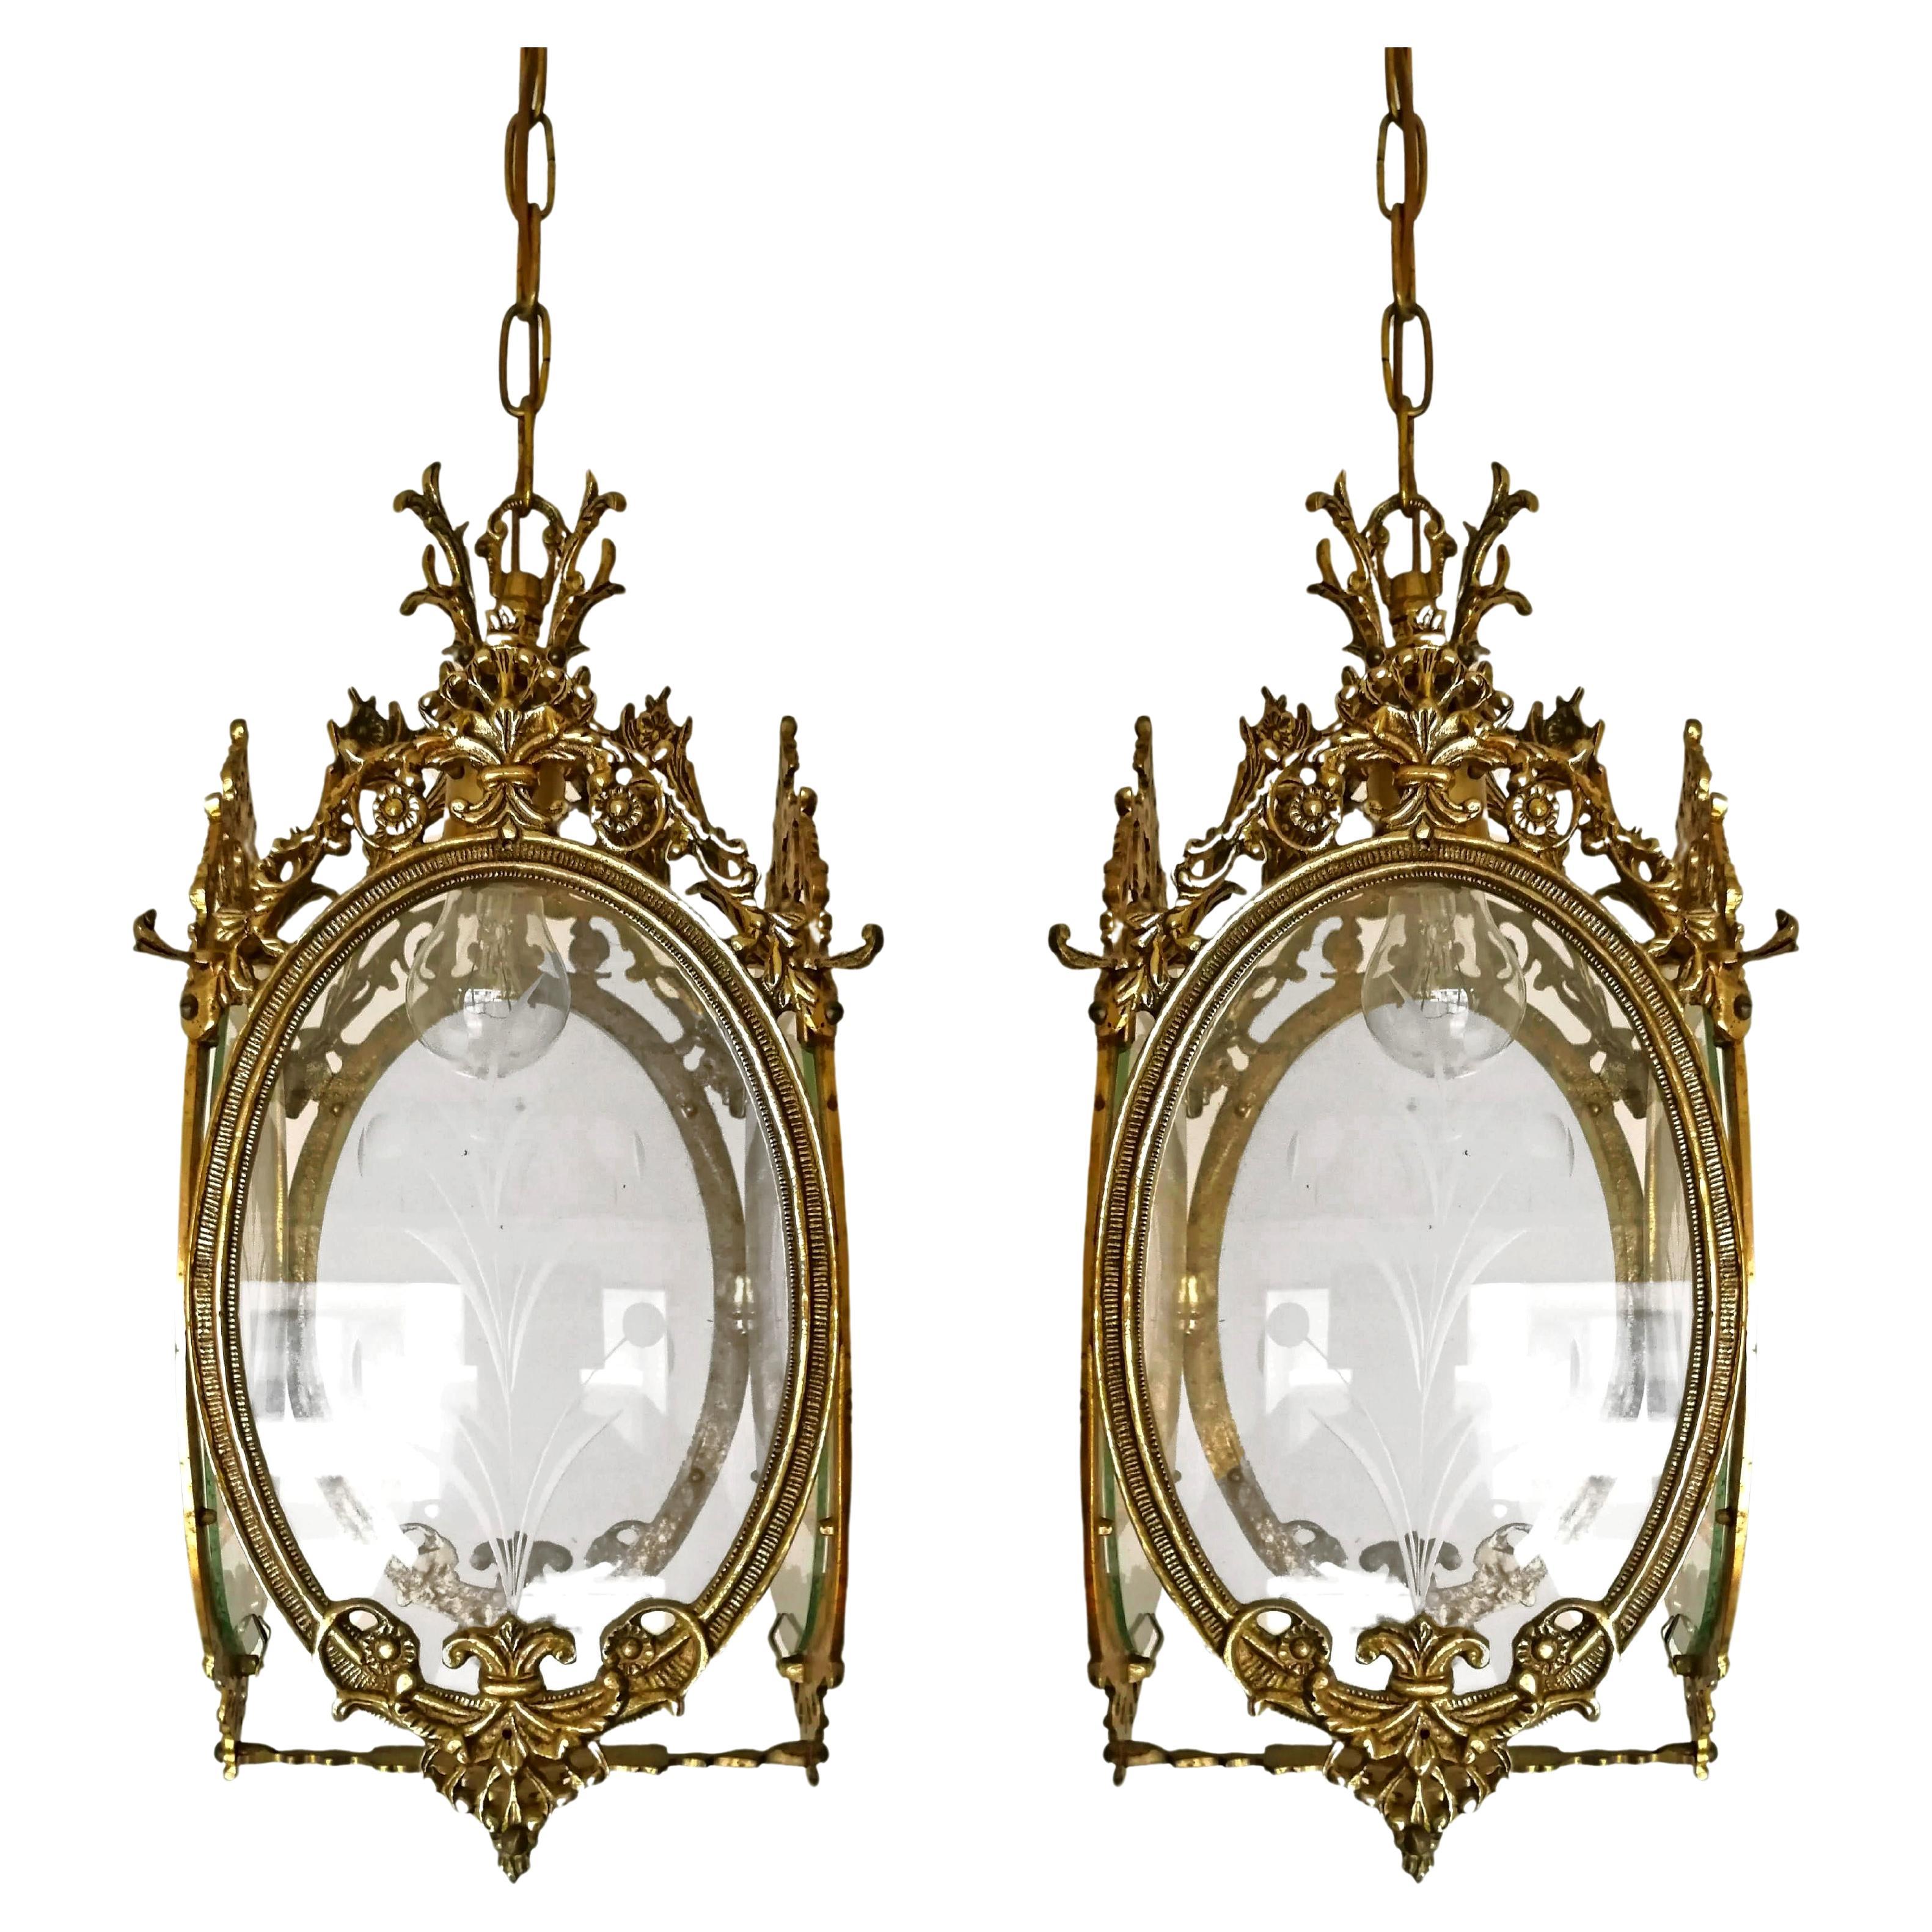 Pair of Antique Louis XVI French Lanterns Chandeliers in Gilt Bronze & Cut Glass For Sale